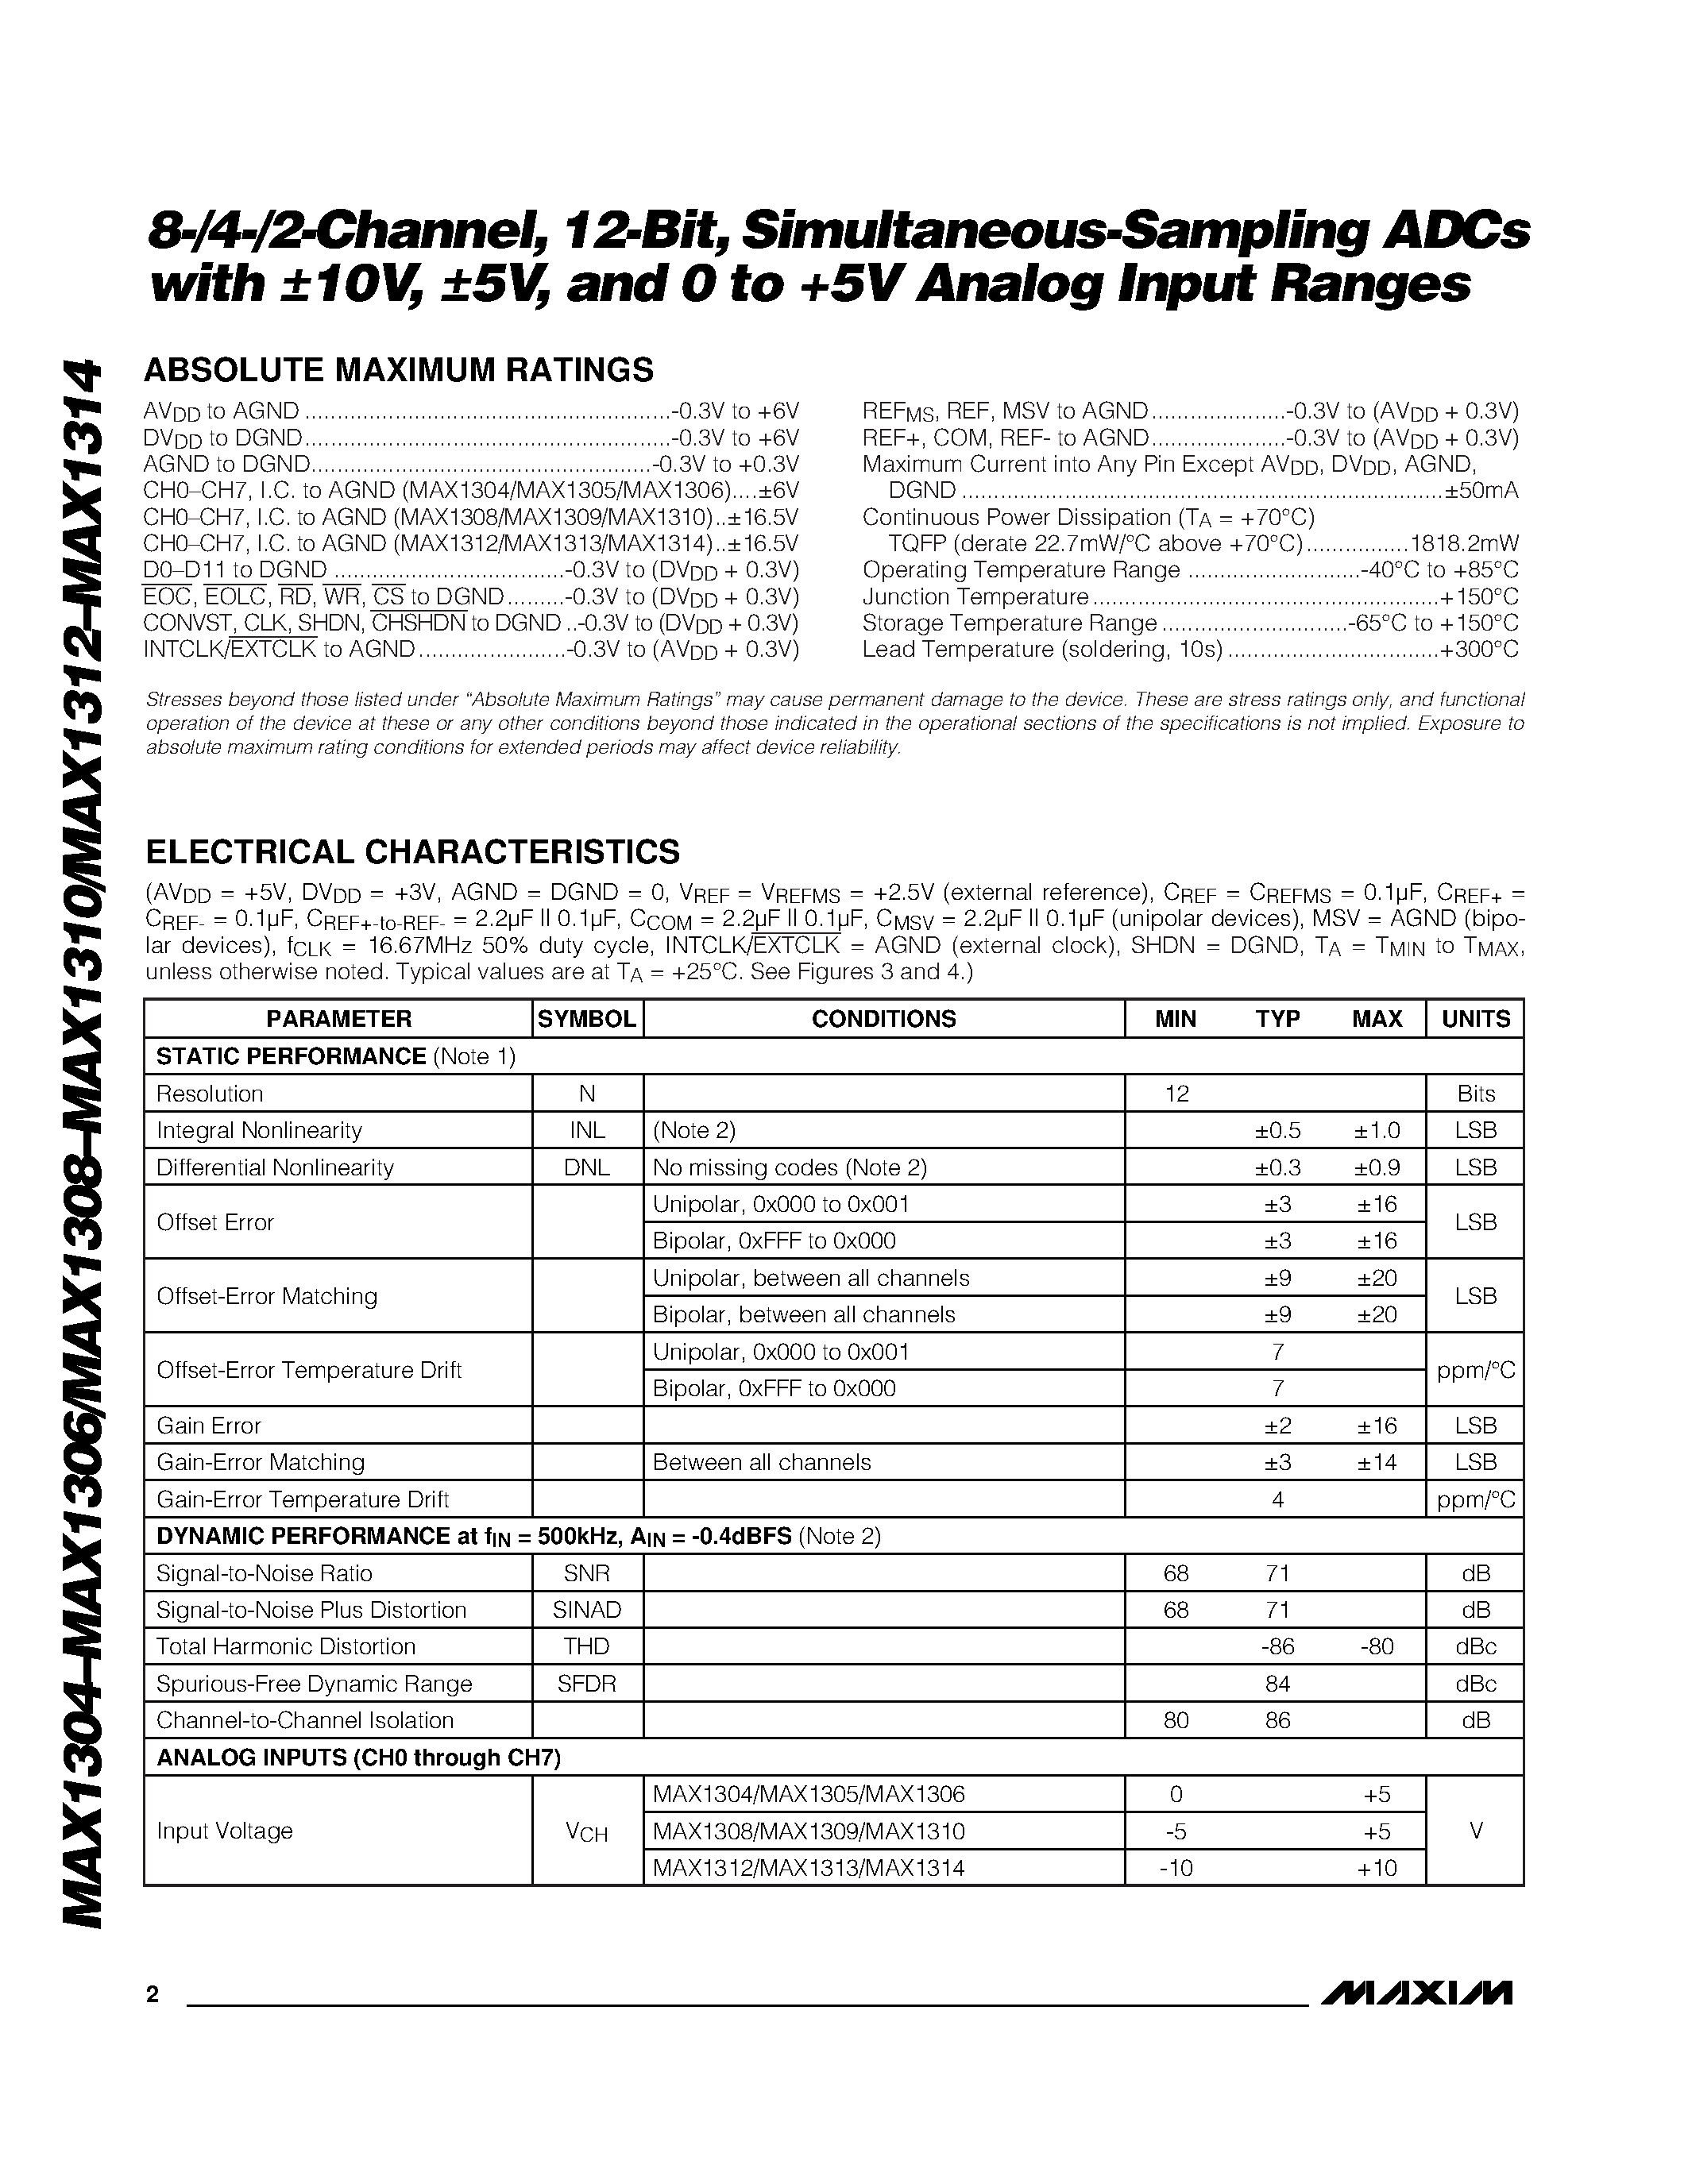 Datasheet MAX1308 - 8-/4-/2-Channel / 12-Bit / Simultaneous-Sampling ADCs with 10V / 5V / and 0 to +5V Analog Input Ranges page 2